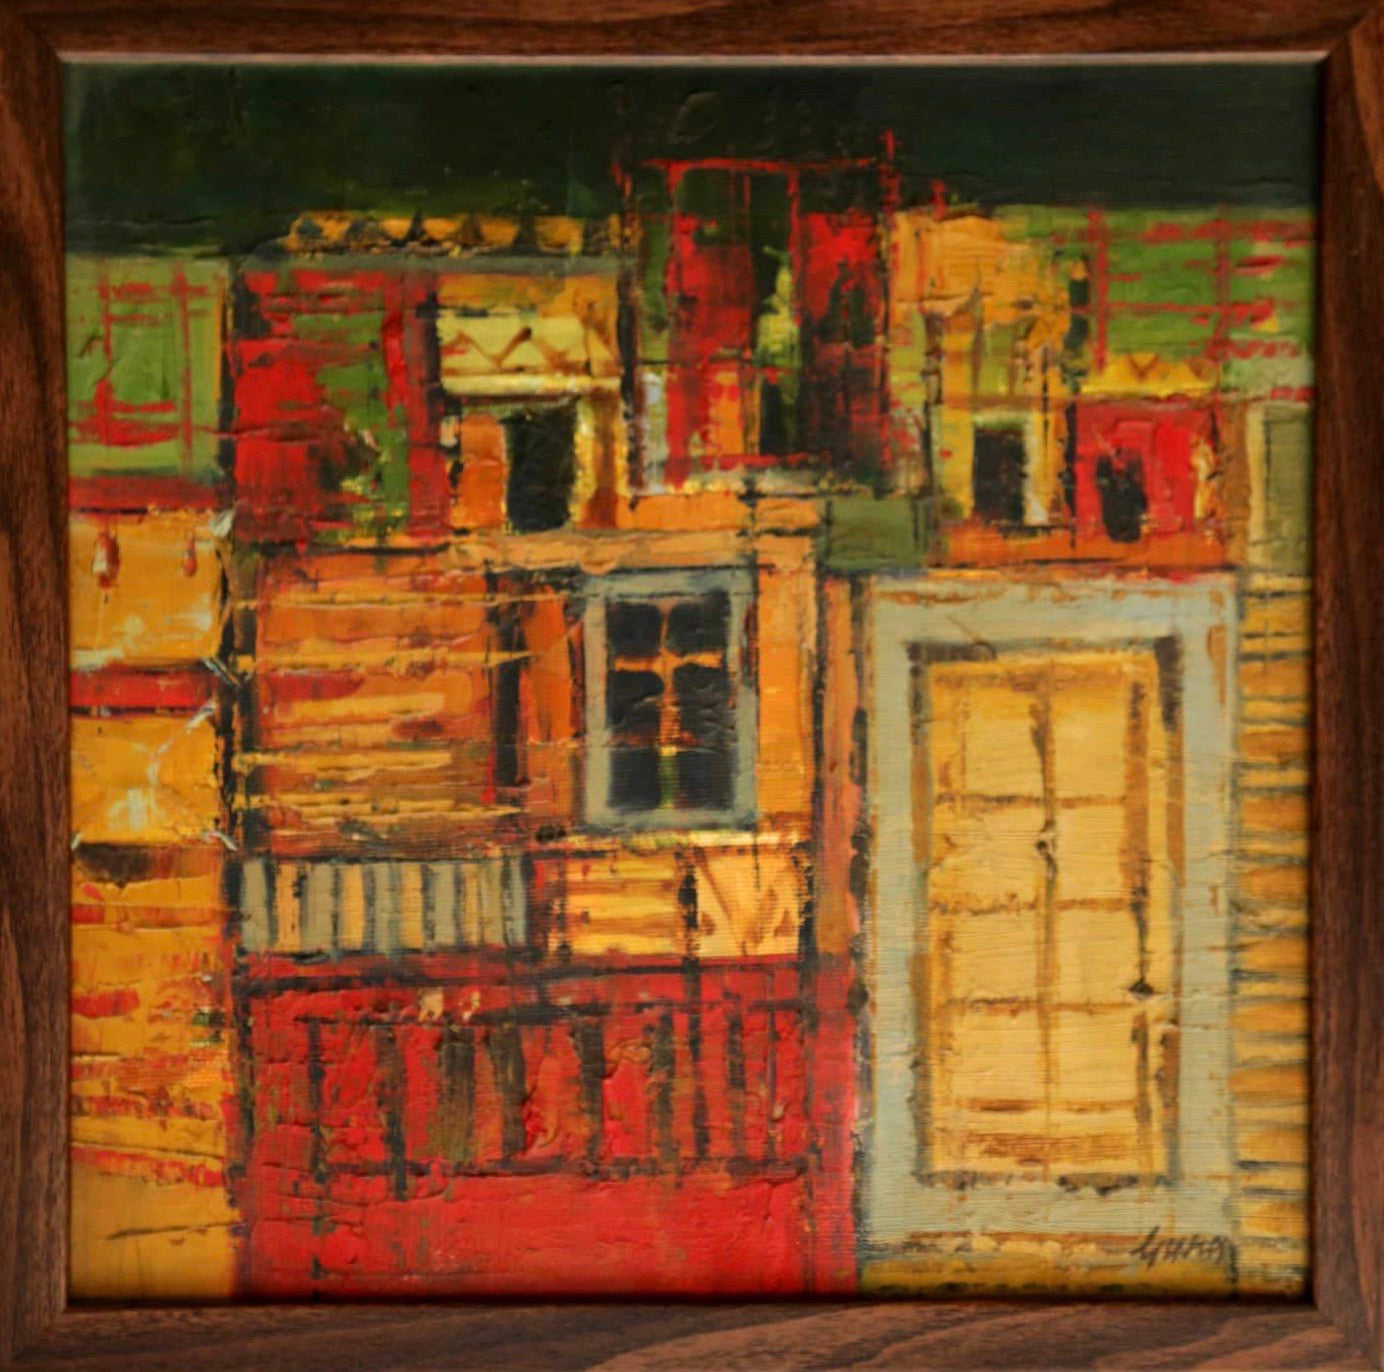 ABSTRACT CITYSCAPE by Gurudas Shenoy | Oil painting on Canvas - Home Decor